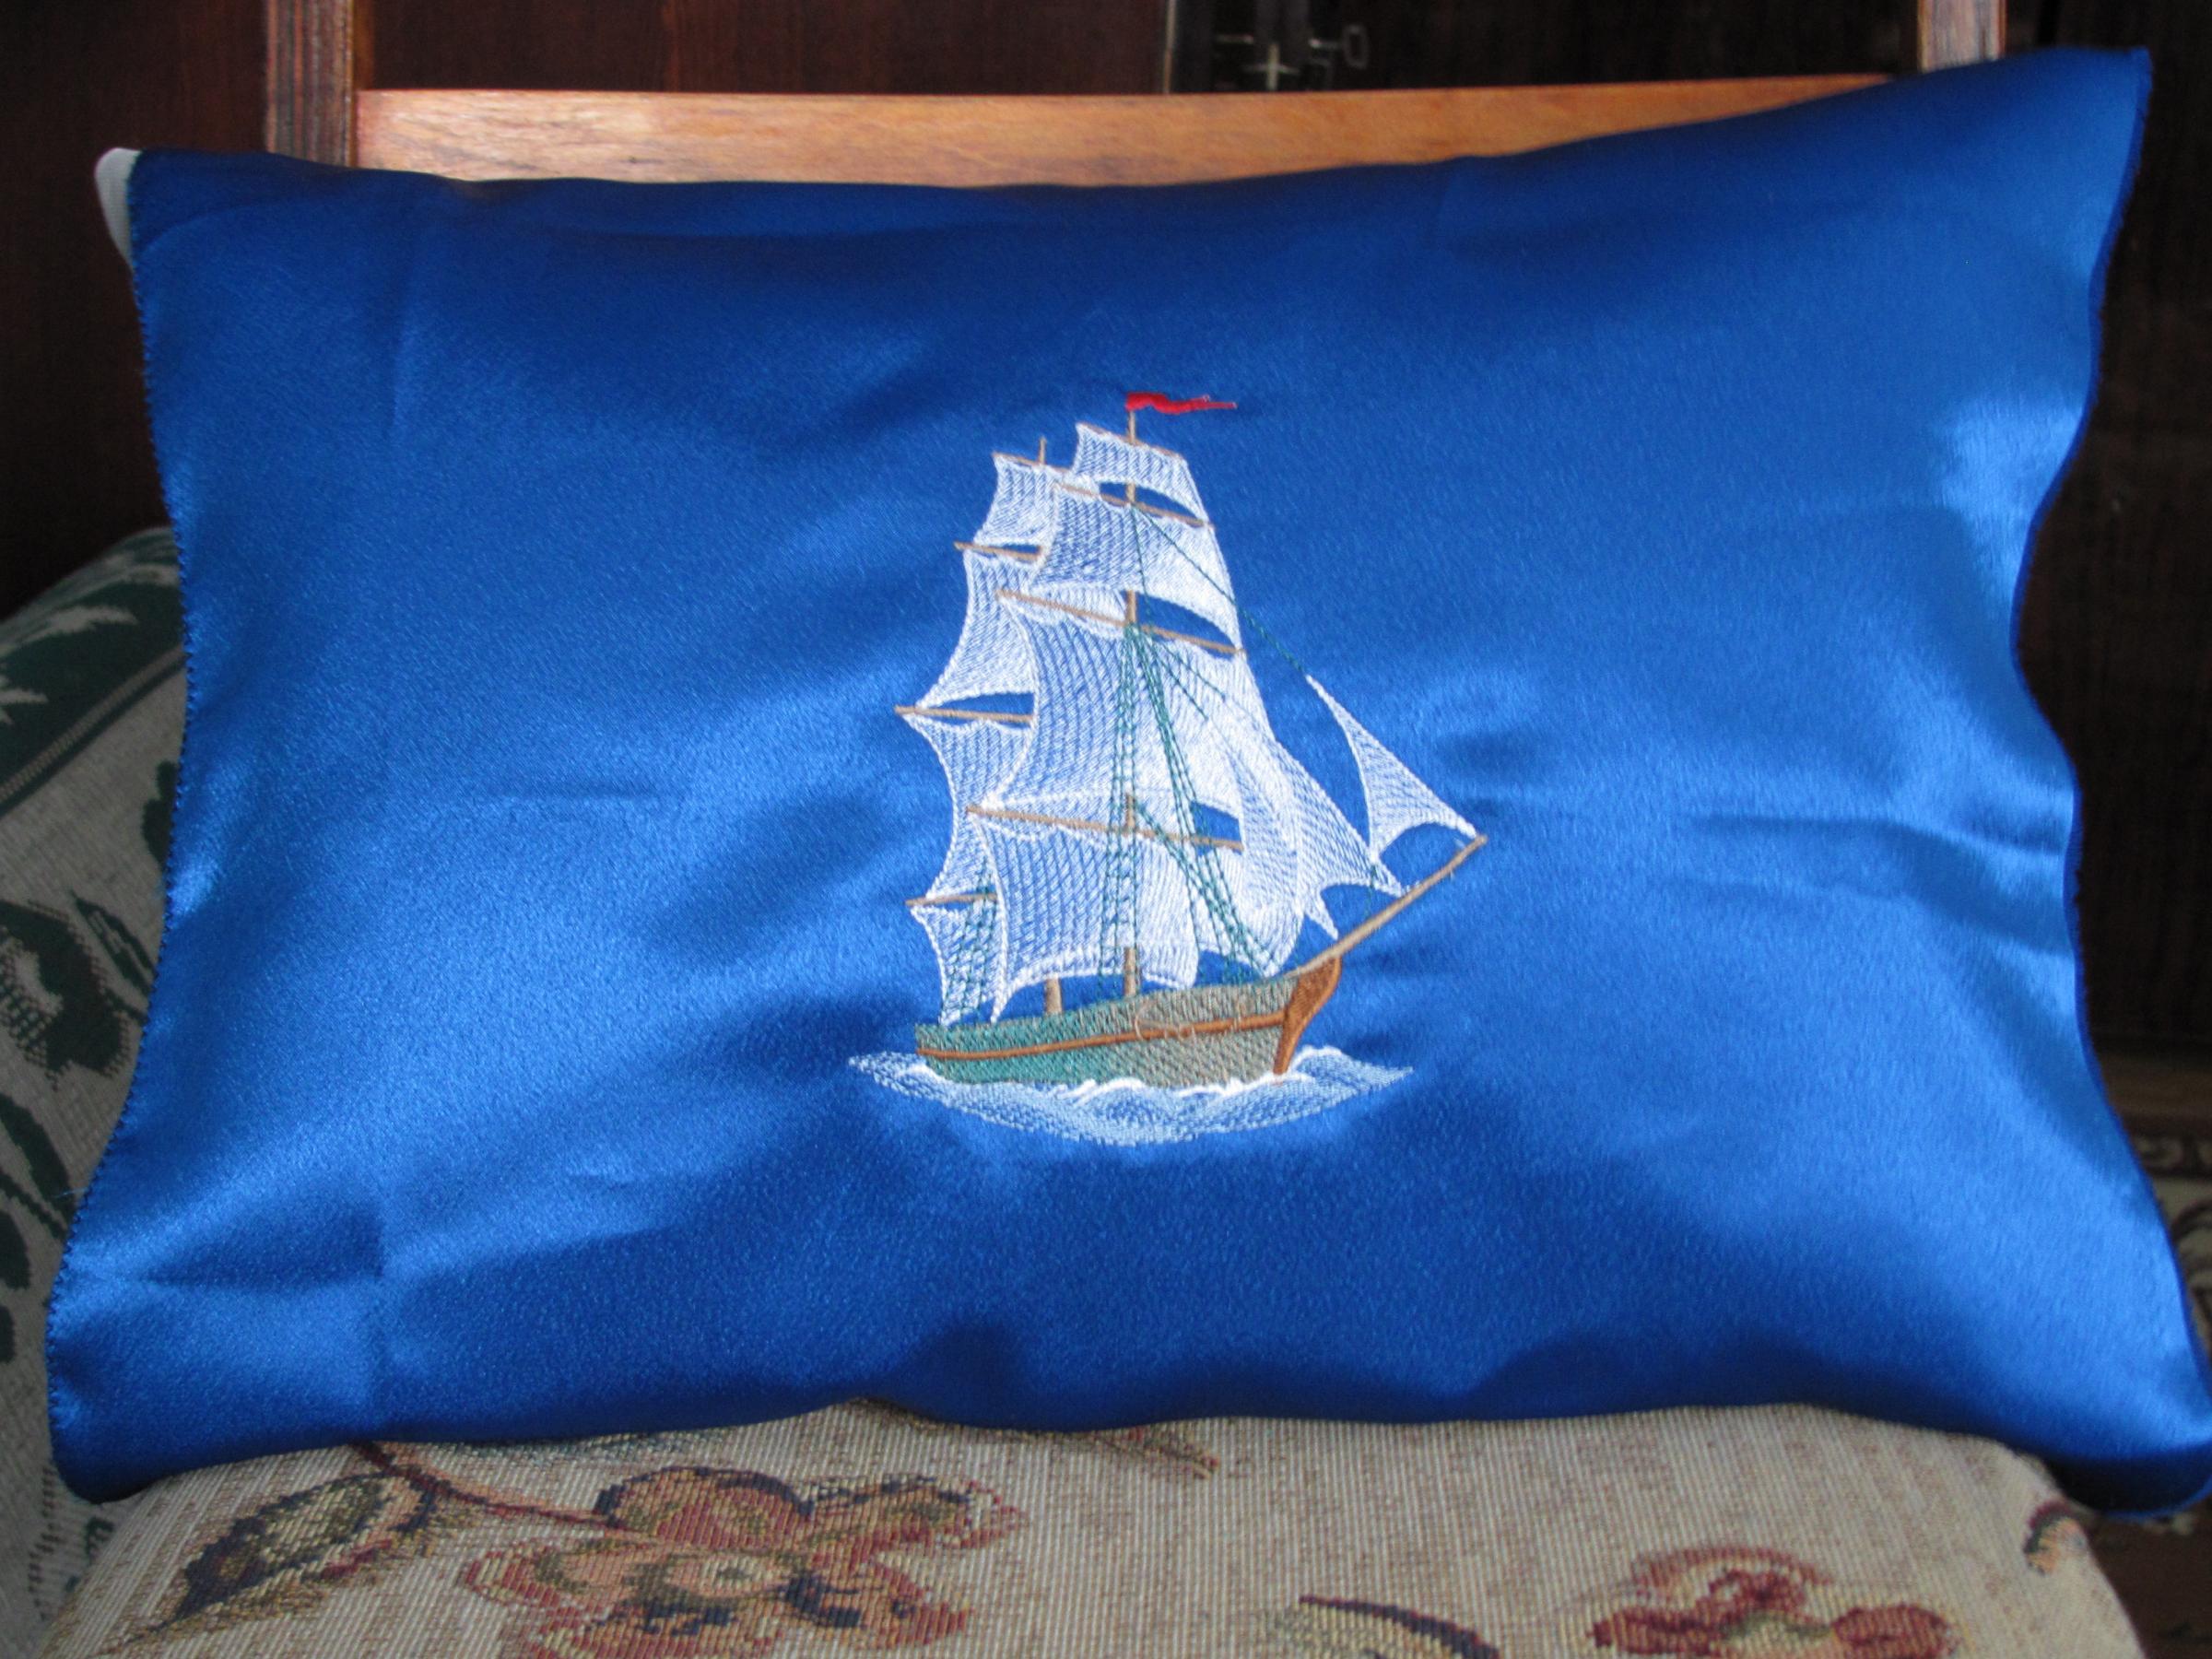 Blue pillow with Sea ship free embroidery design